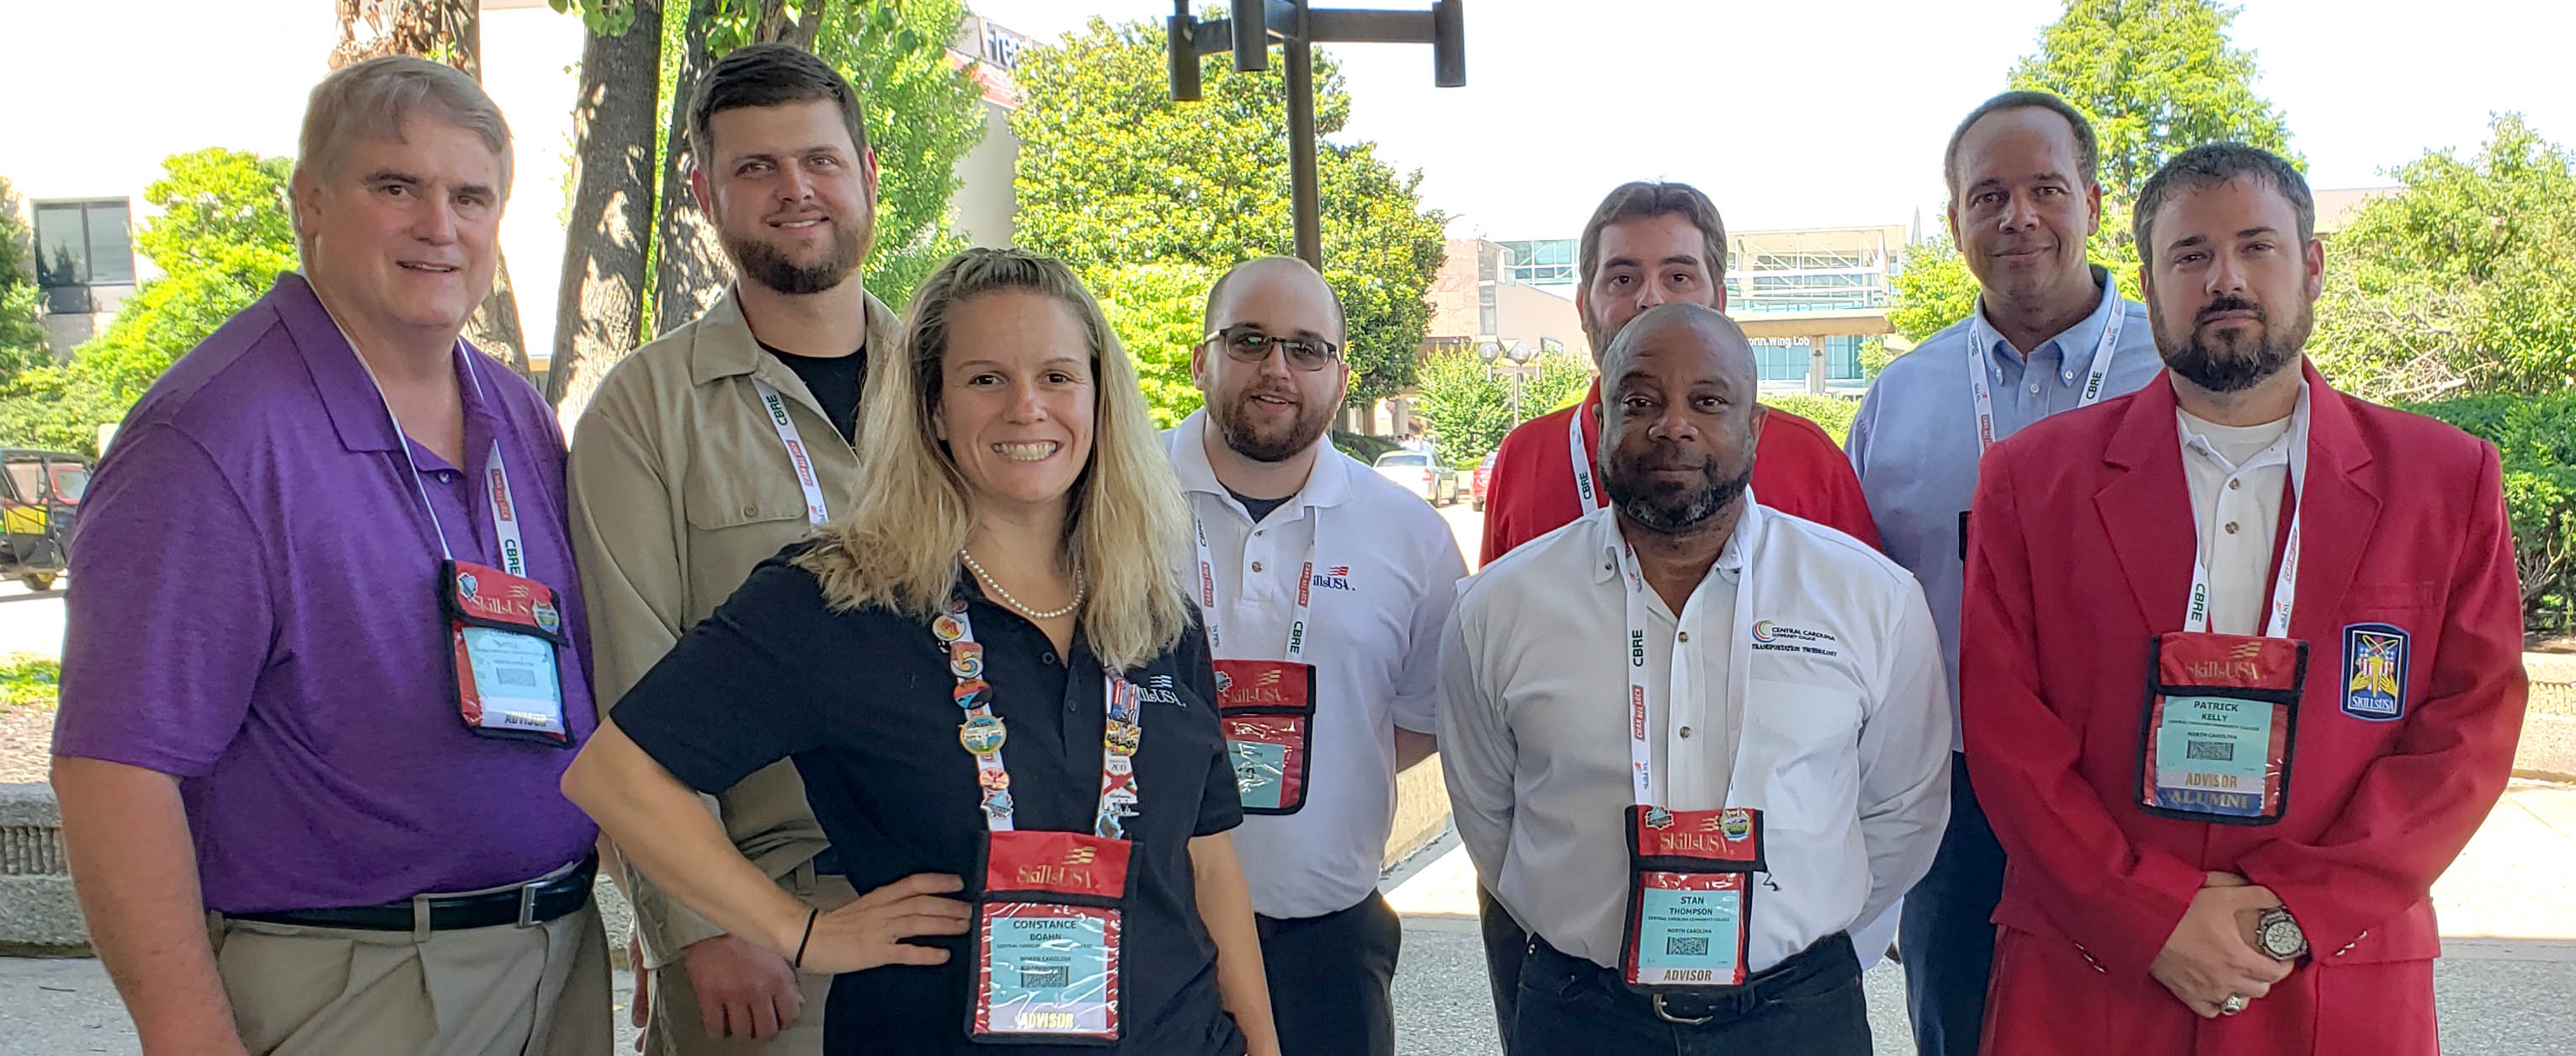 Click to enlarge,  Attending the SkillsUSA National Leadership and Skills Conference in Louisville, Ky., were, left to right: front row, CCCC Department Chair for Engineering and Computer Information Technologies Constance Boahn, CCCC Lead Motorcycle Mechanics Instructor Stanley Thompson, and CCCC SkillsUSA Advisor Patrick Kelly; back row, CCCC Lead Welding Instructor Charles Bell, SkillsUSA Championships participant James Culbreth, SkillsUSA Championships participant Jordan Norris, CCCC NET Instructor John Ainsworth, and SkillsUSA Championships participant Trevor Brown. 